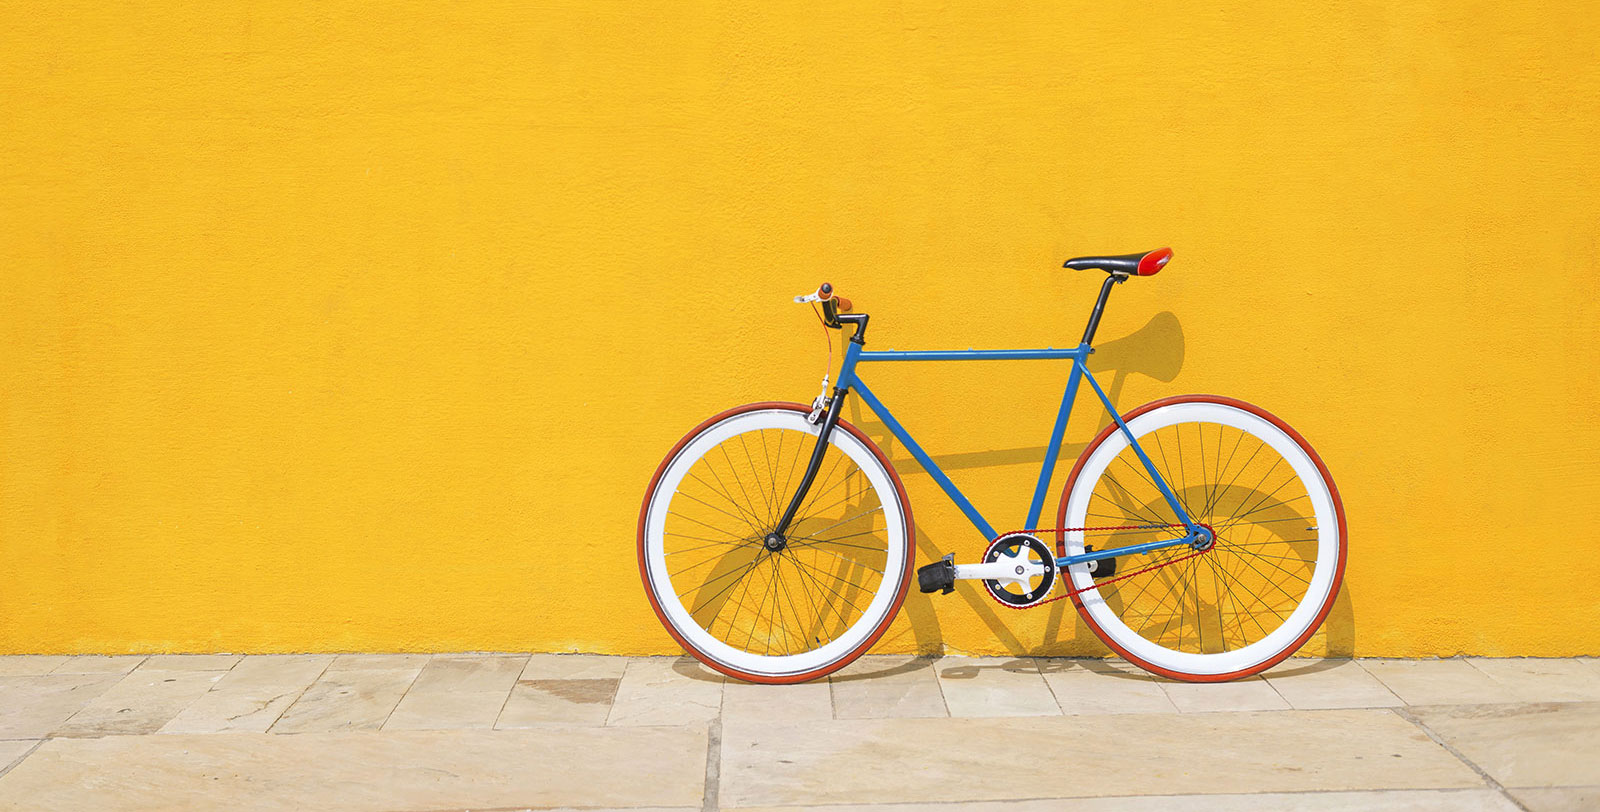 A blue, red and white bicycle leaning against yellow wall.